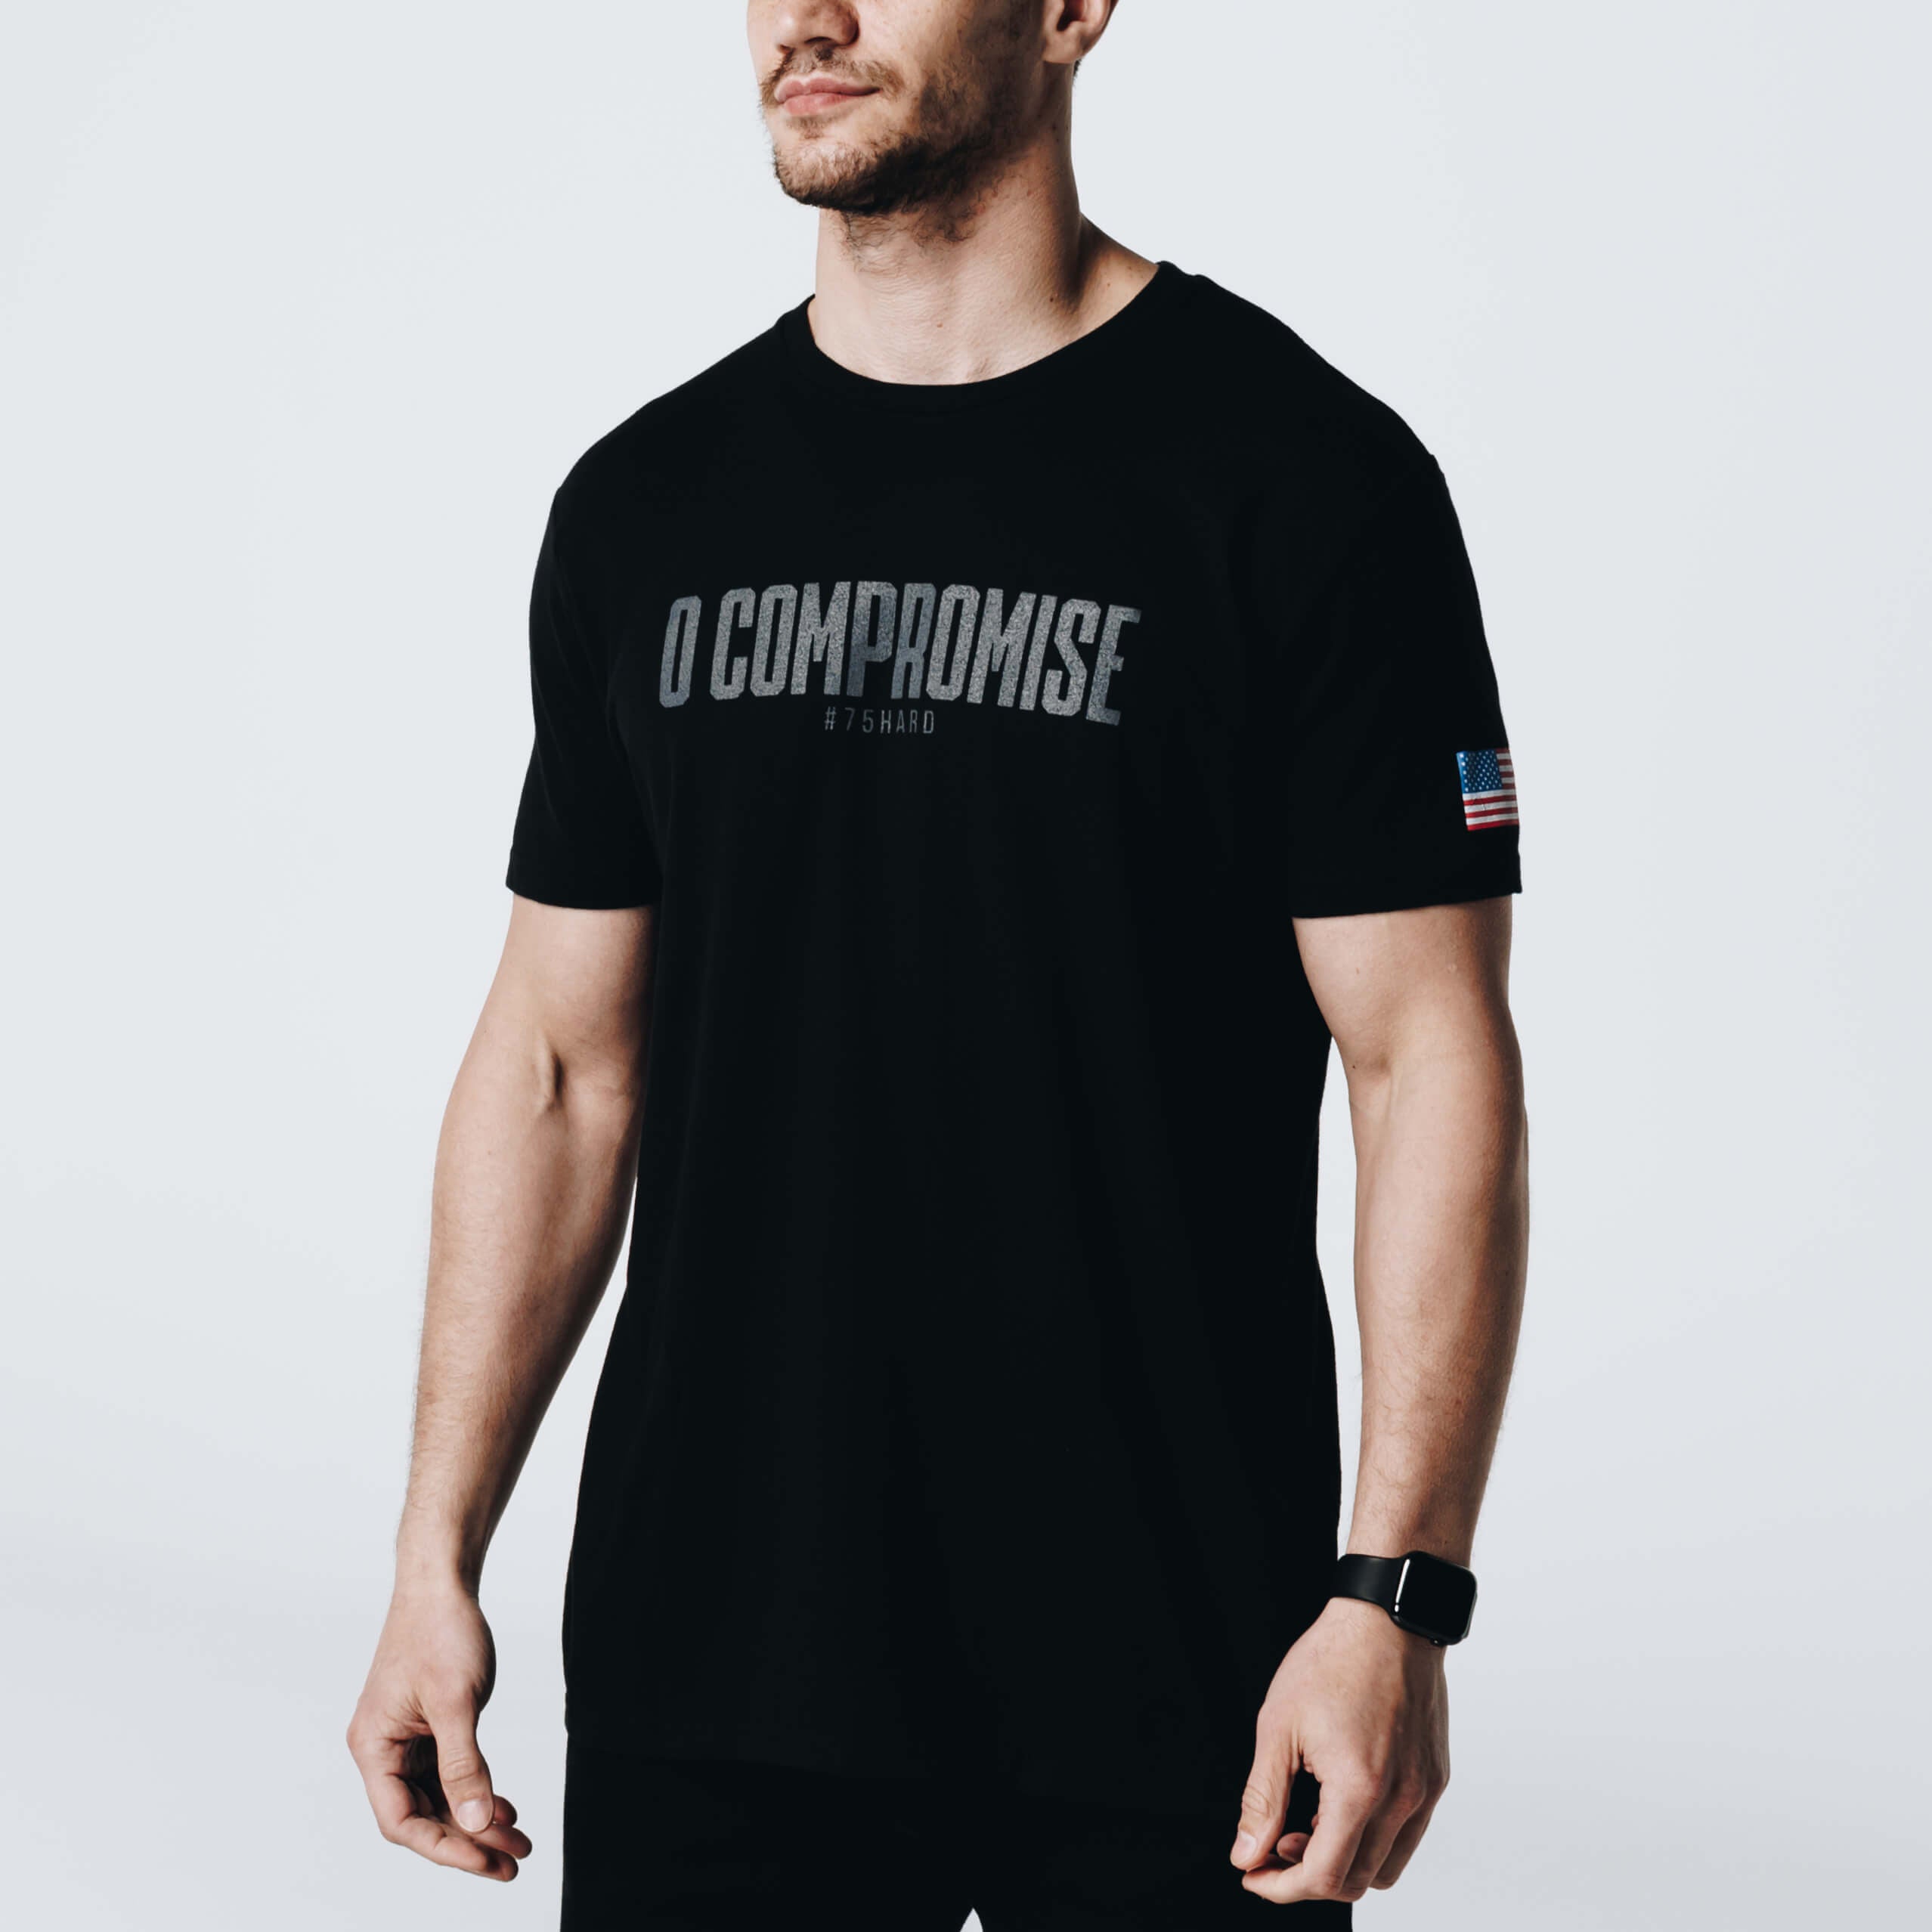 No Compromise Clothing